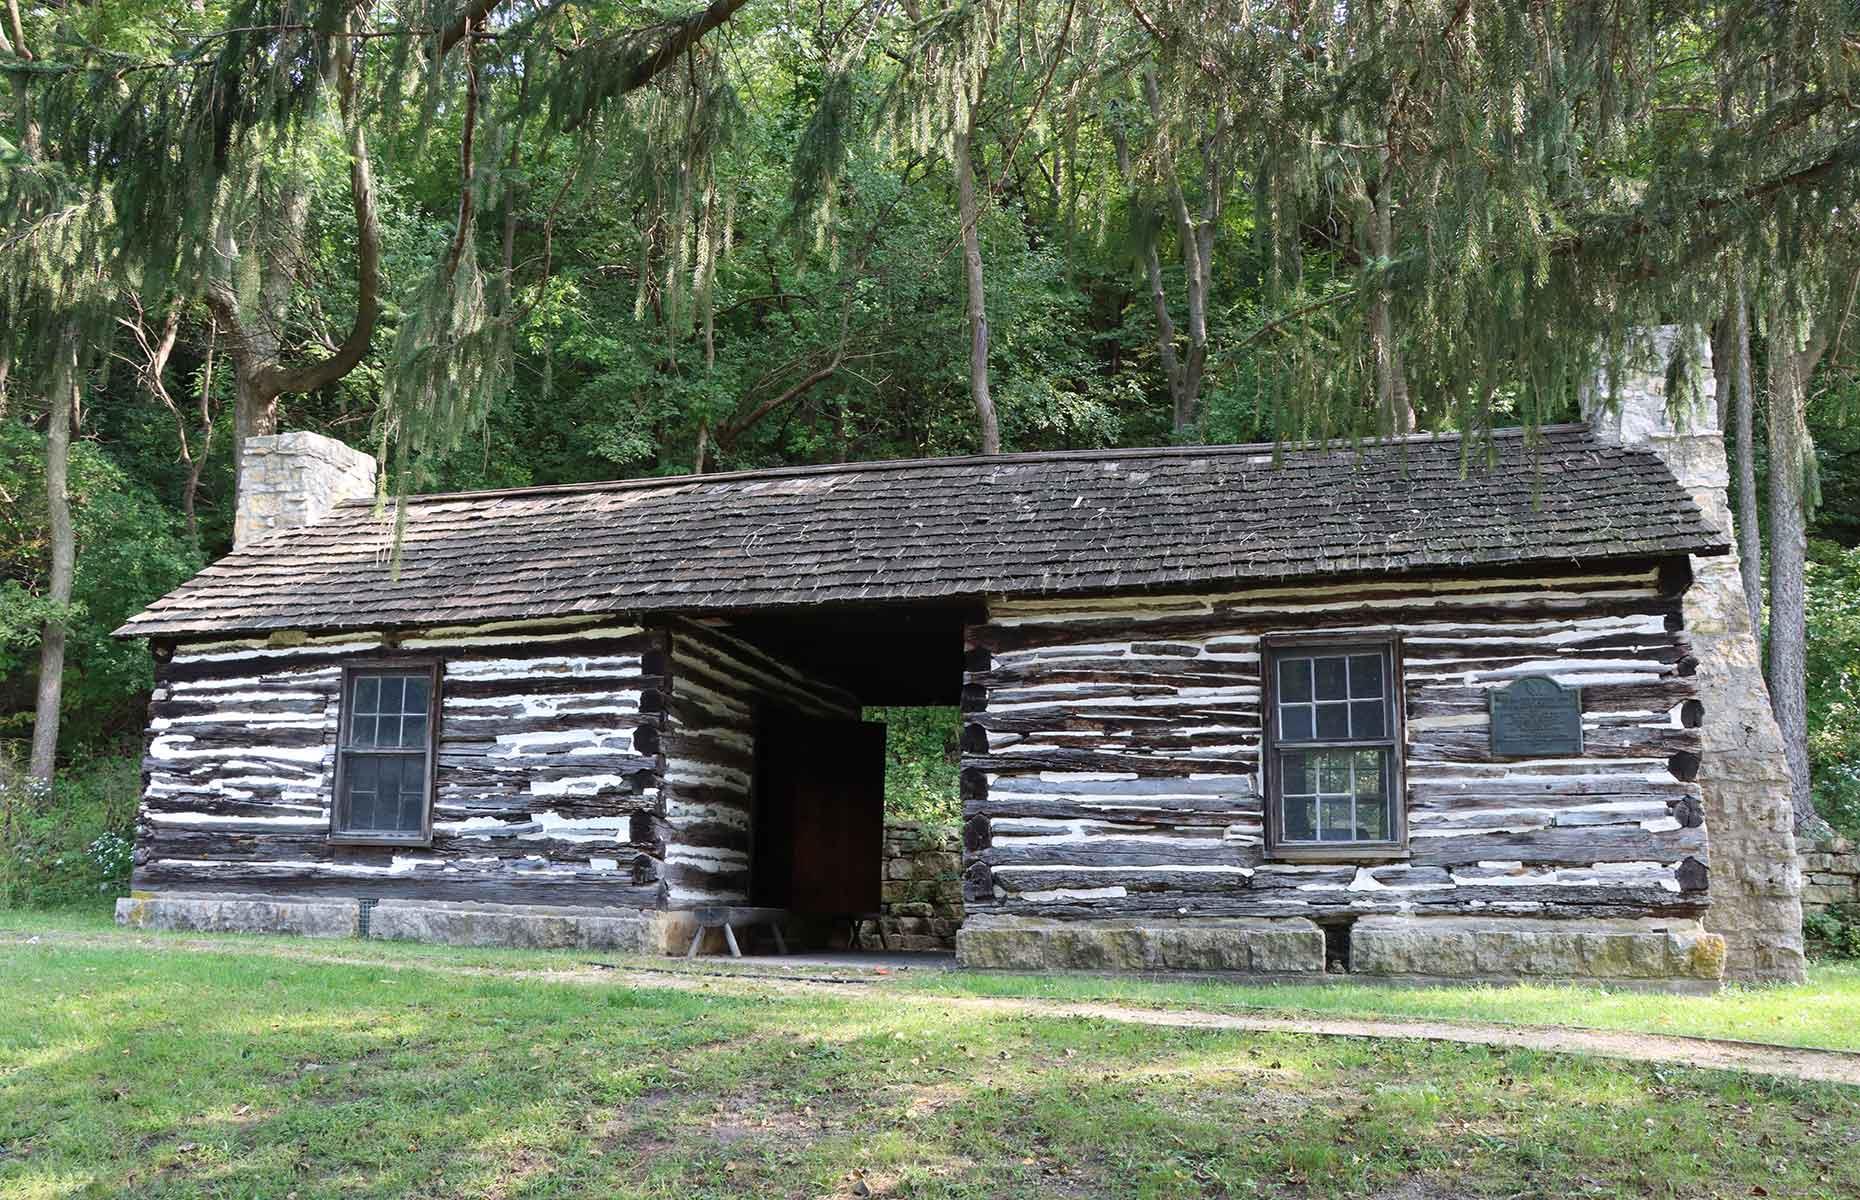 <p>While the <a href="https://louisacountyconservation.org/lccb_areas/toolesboro-mounds-nhl/">Toolesboro Mound Group</a> is probably the earliest Native American site in Iowa you can visit – dating to 200 BC – the Louis Arriandeaux Log House makes for a more memorable trip. Built around 1827 by a French fur trader from Canada, it was originally windowless and a chimney was added at a later date. The cabin has been deconstructed and rebuilt several times; today, it’s set in its third location at the <a href="https://www.rivermuseum.com/hamsite">Mathias Ham Historic Site</a>, with public and private tours available.</p>